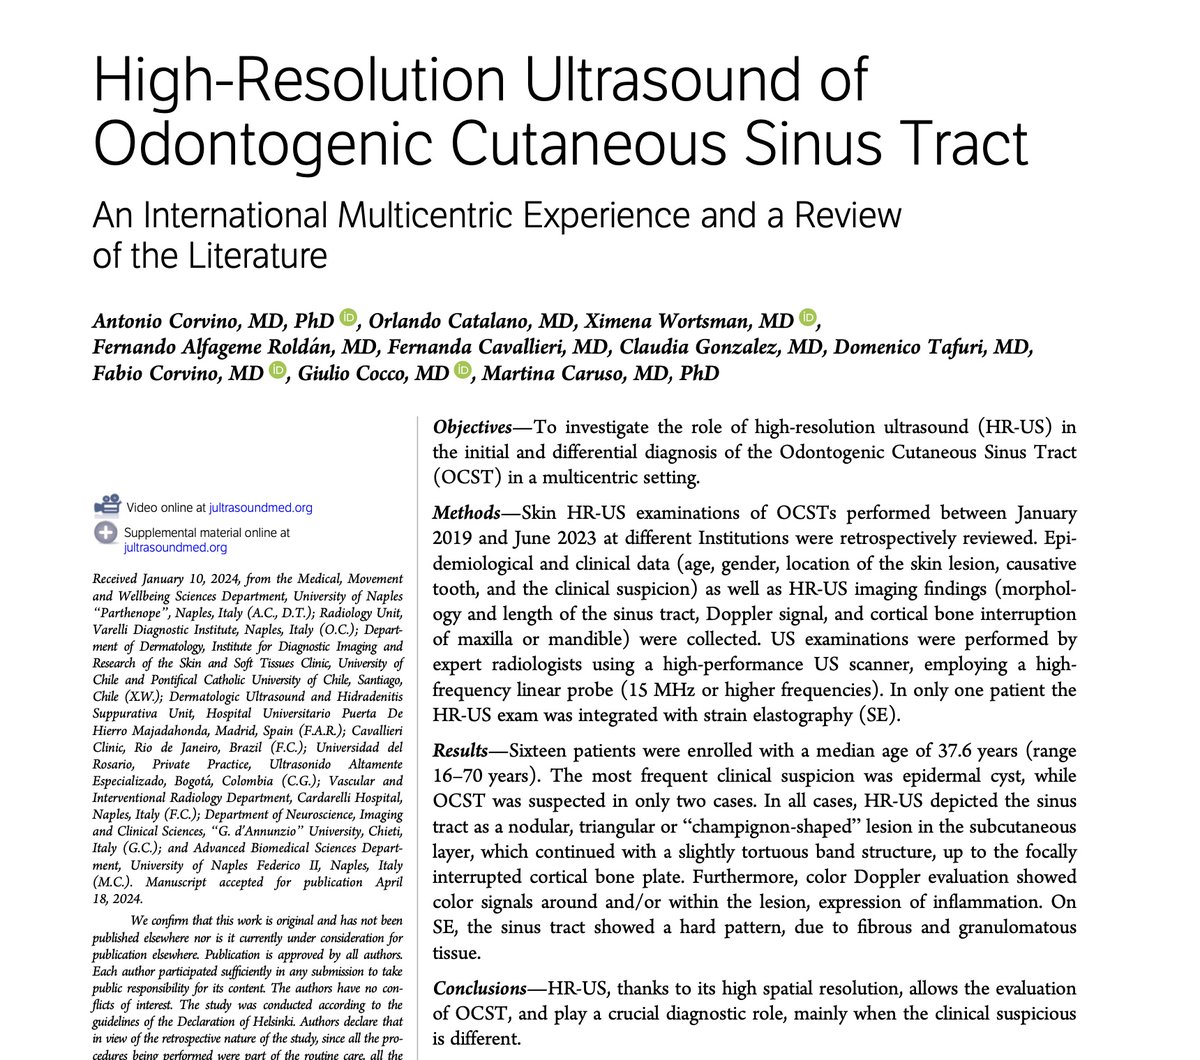 Check this multicentric experience on the Ultrasound of the Odontogenic Cutaneous Sinus Tract, which is a powerful simulator of other dermatologic conditions. Great work by Corvino et al., where I had the honor to contribute. Link: pubmed.ncbi.nlm.nih.gov/38708914/ @sonoskin @xworts